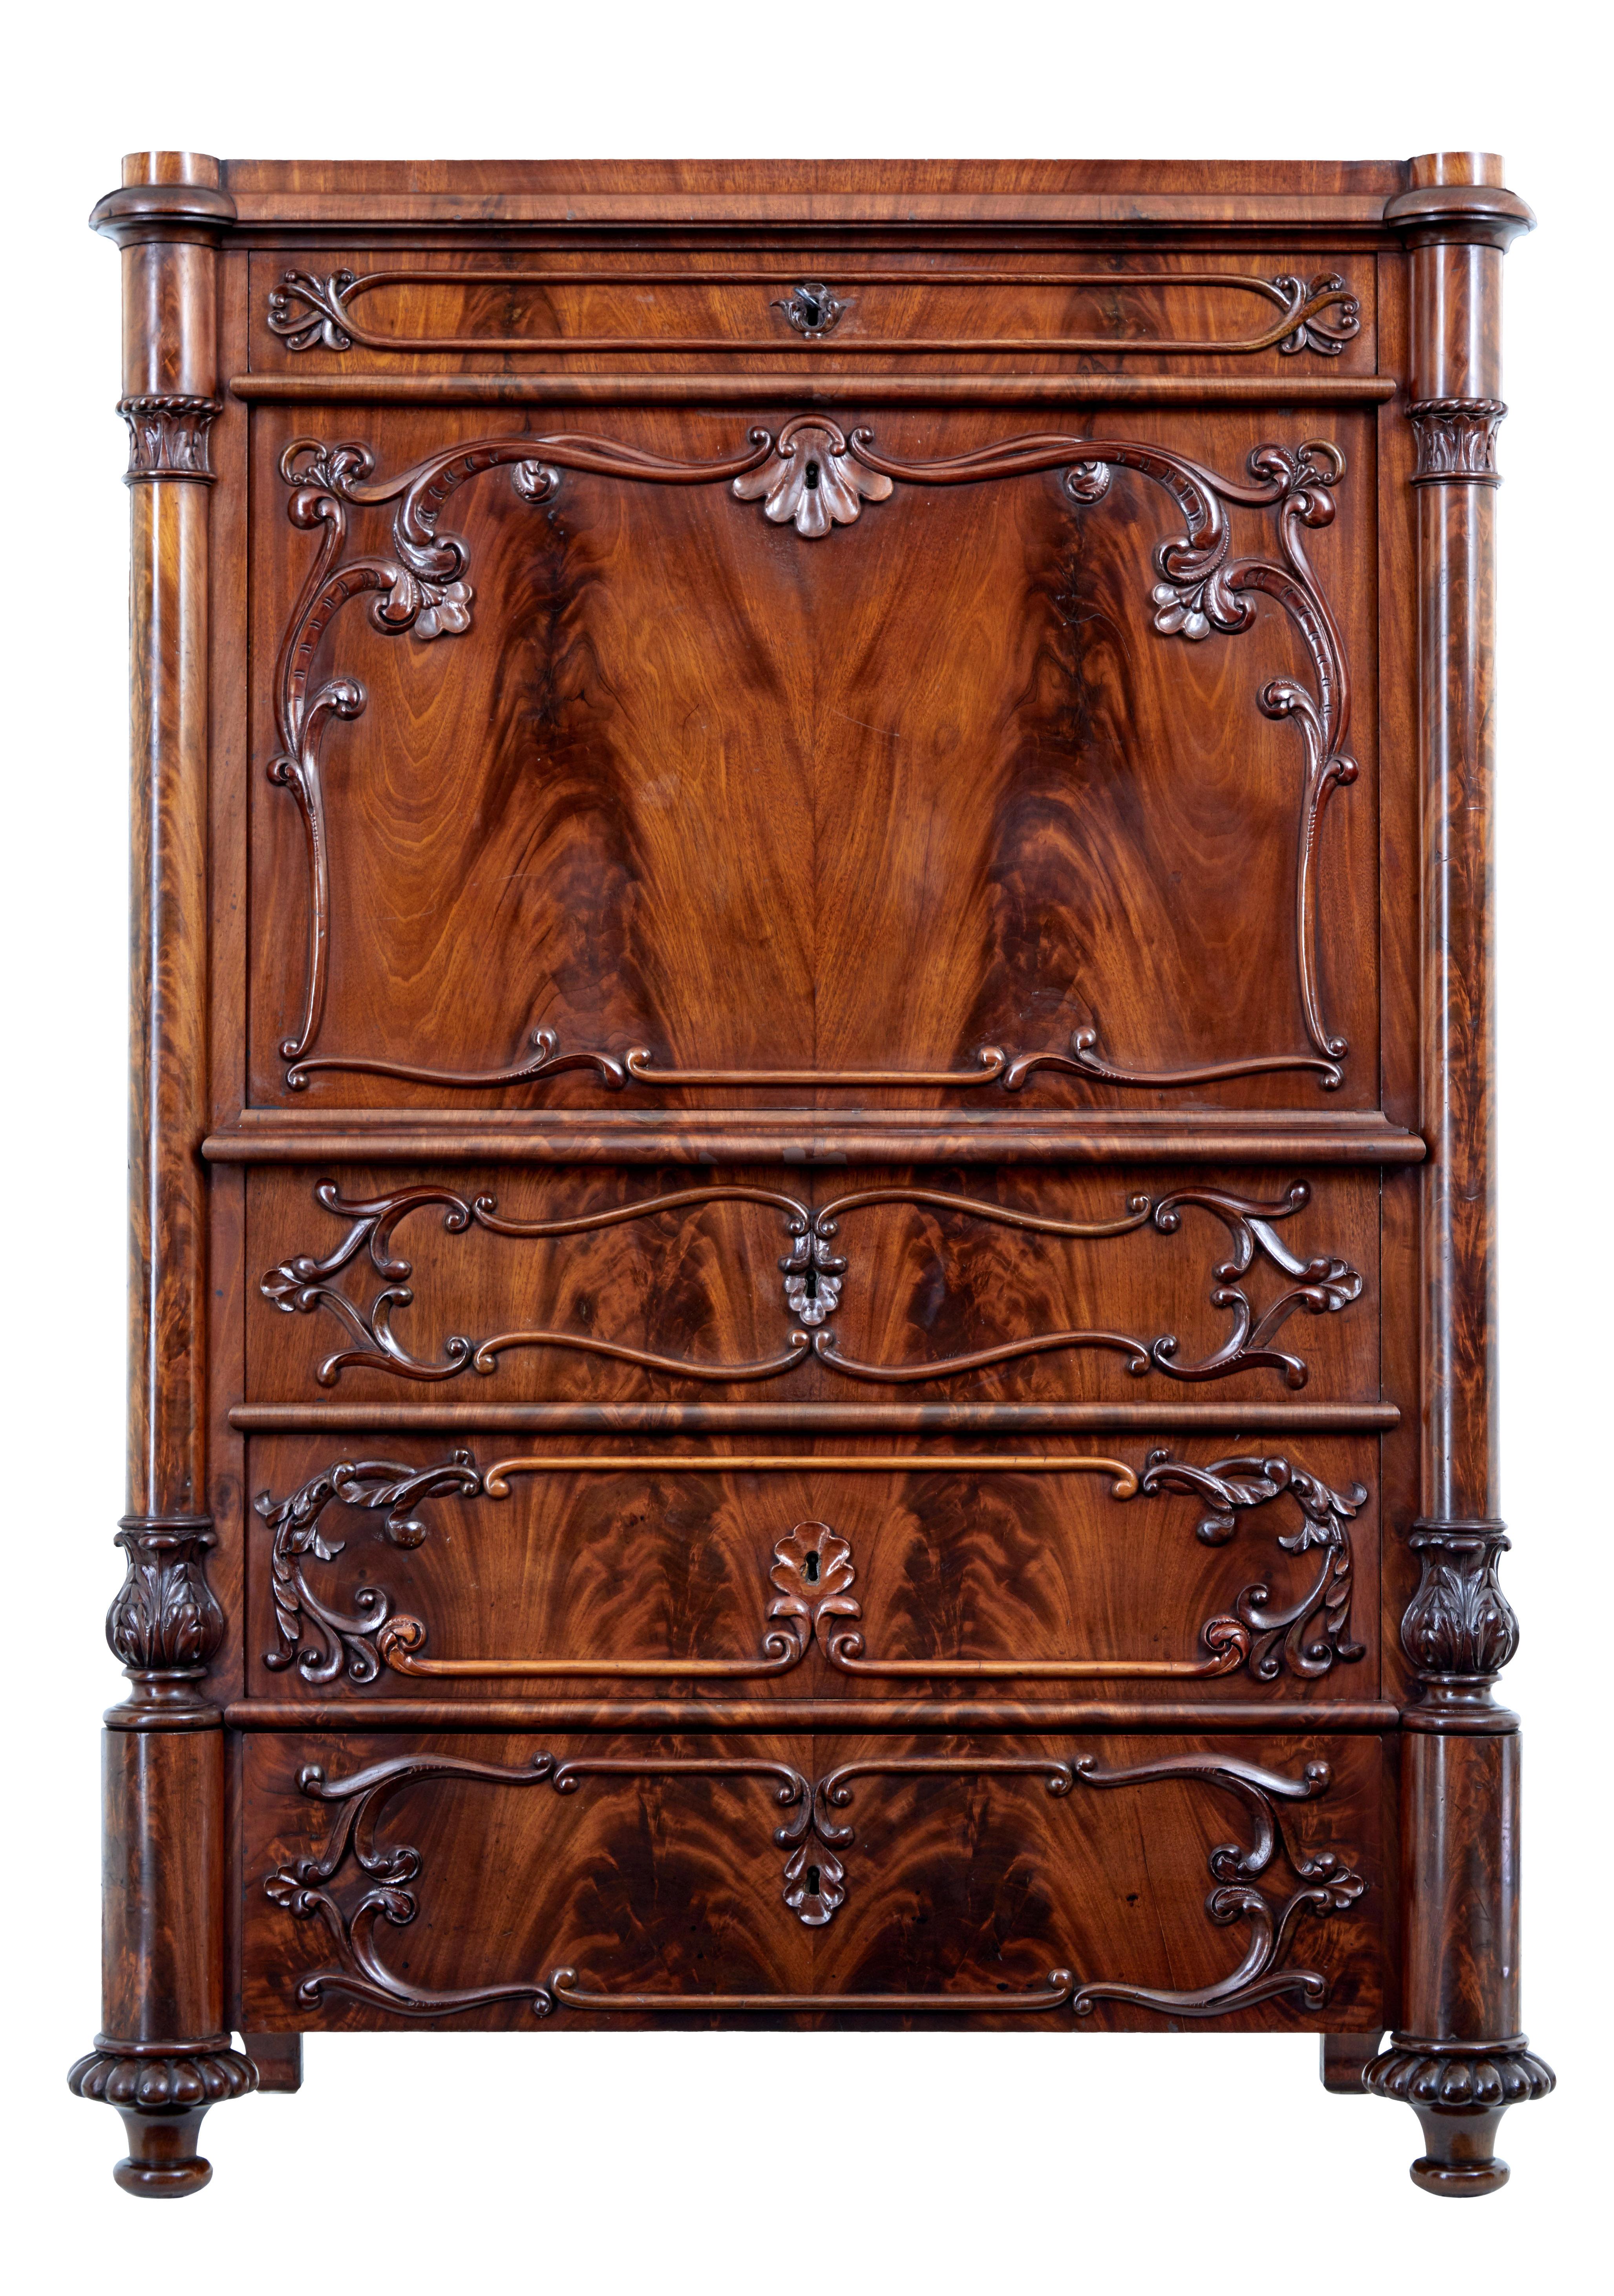 Fine quality Swedish made mahogany secrétaire, circa 1870.

Beautifully applied matched flame mahogany veneers. Single top drawer, with fall below followed by a further 3 drawers all flanked each side by a column each side with carving.

Fall